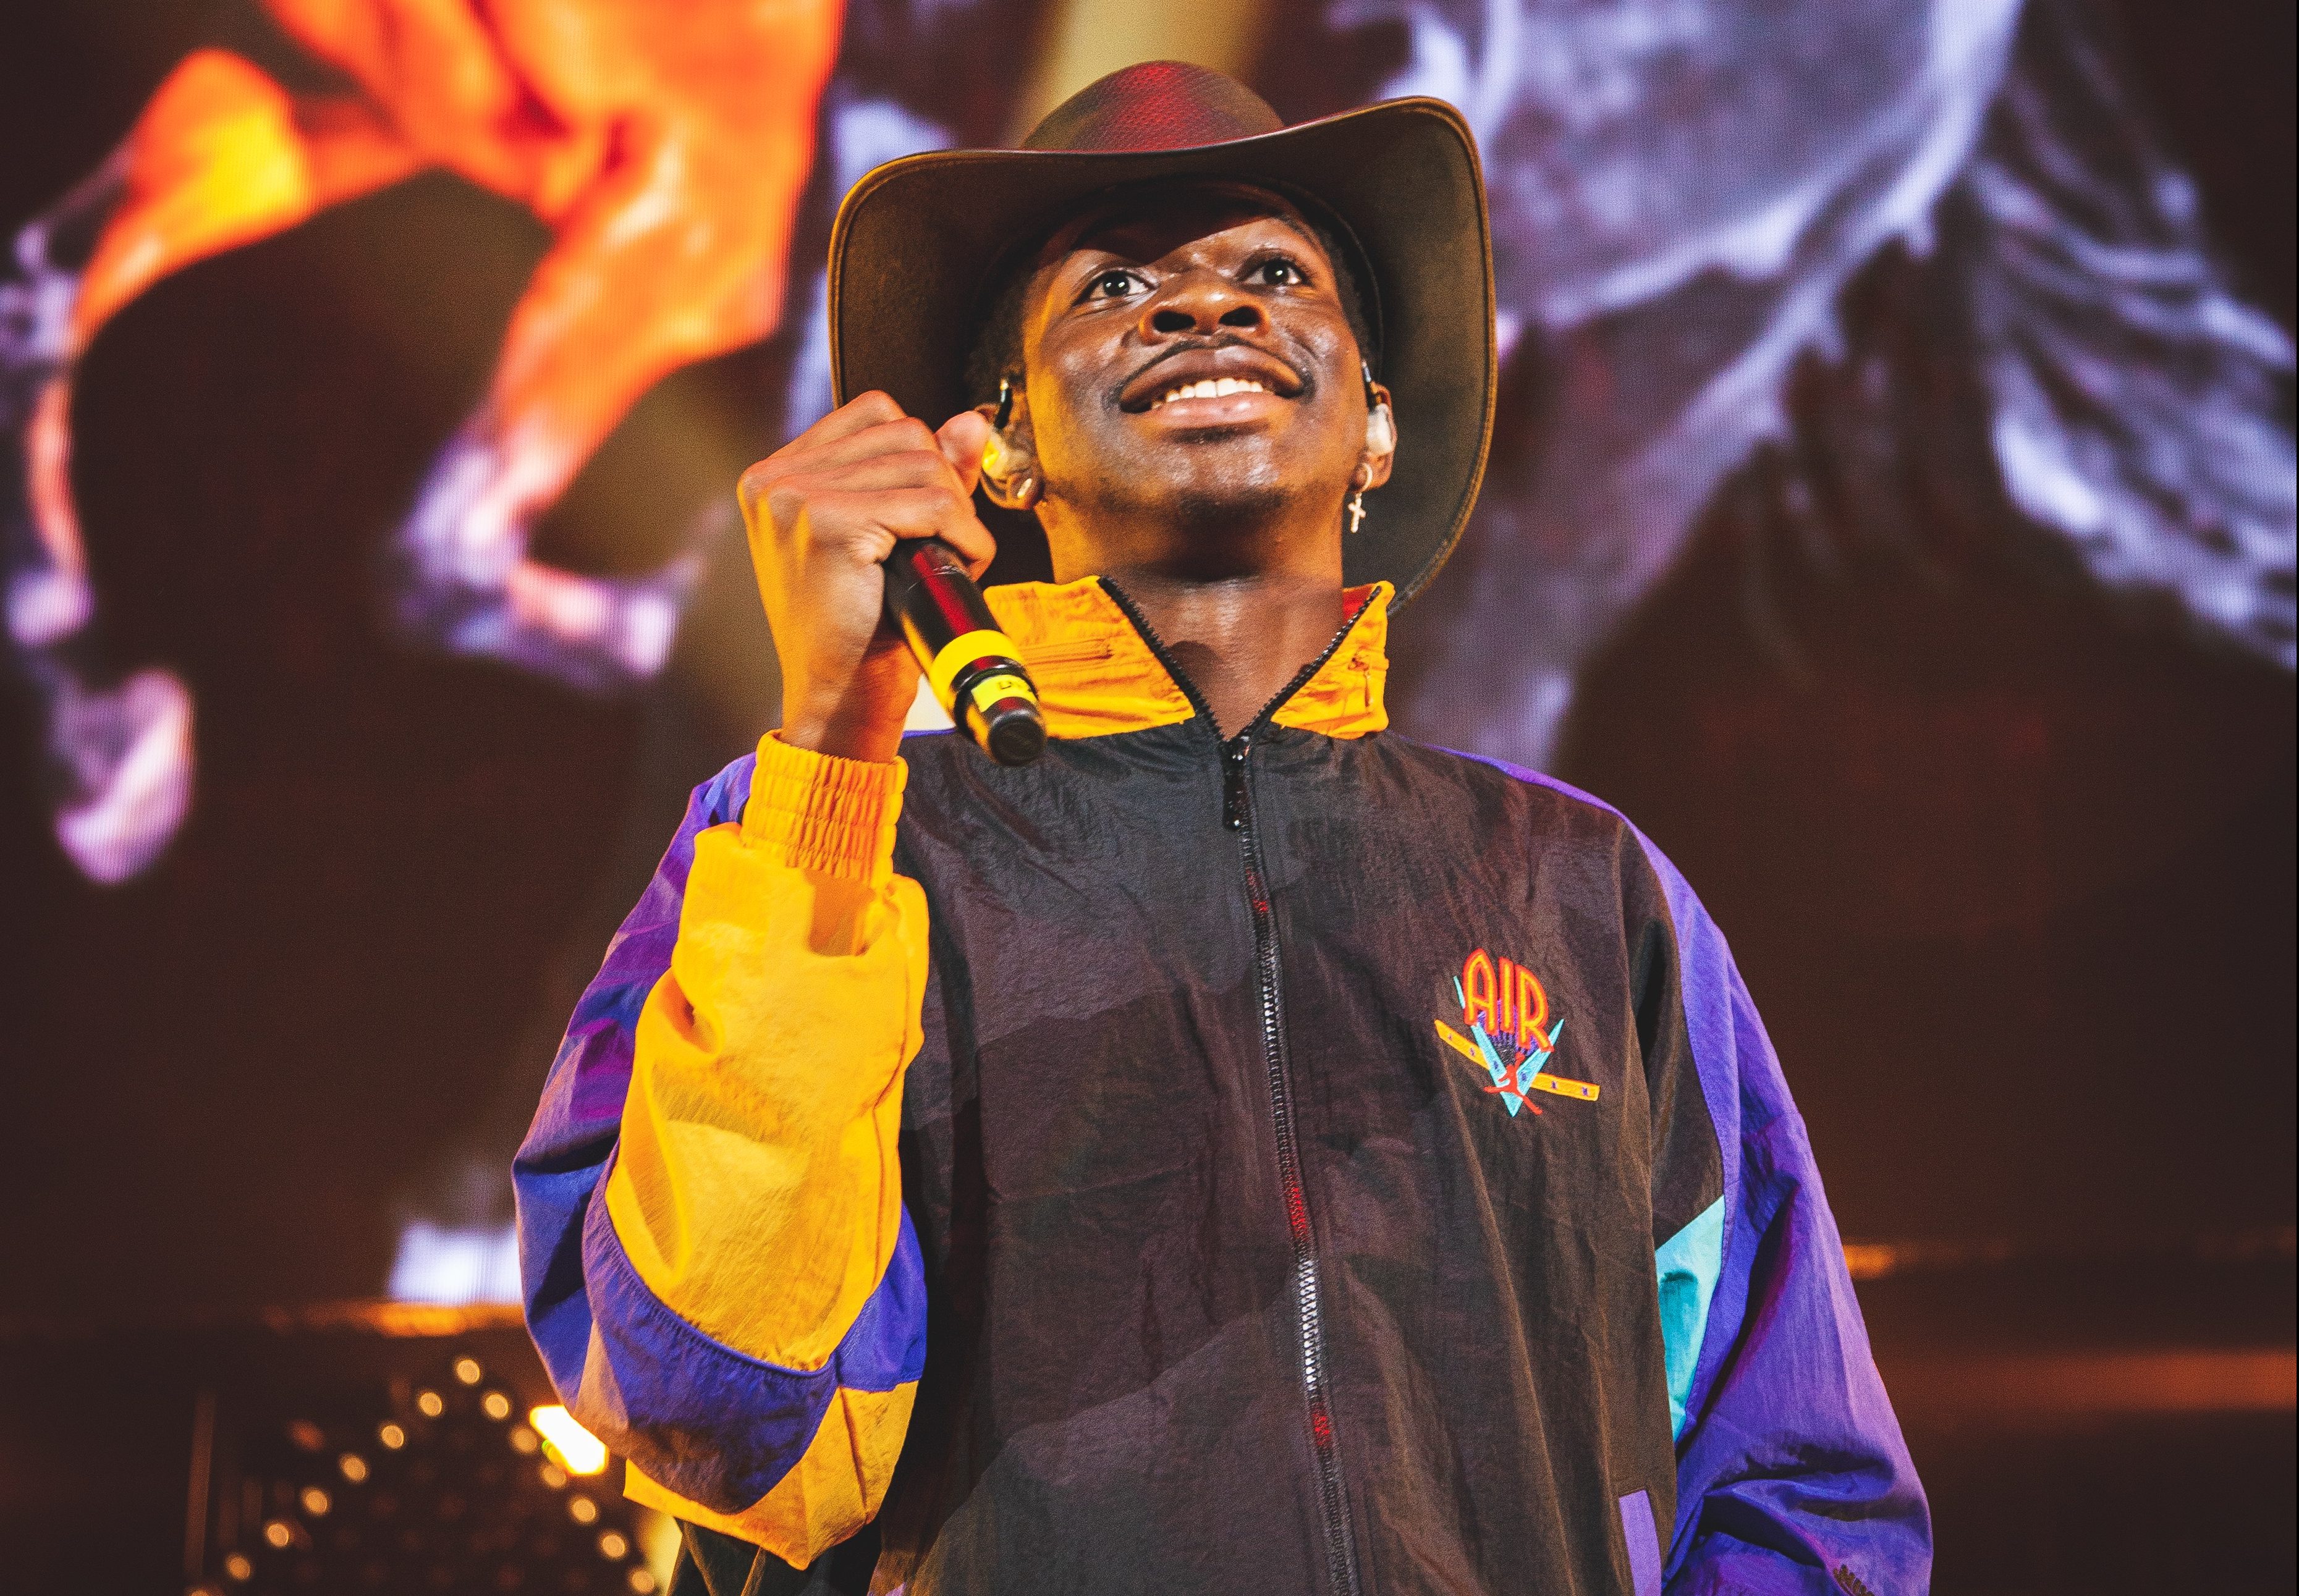 Taco Bell Announces New Partnership With Lil Nas X